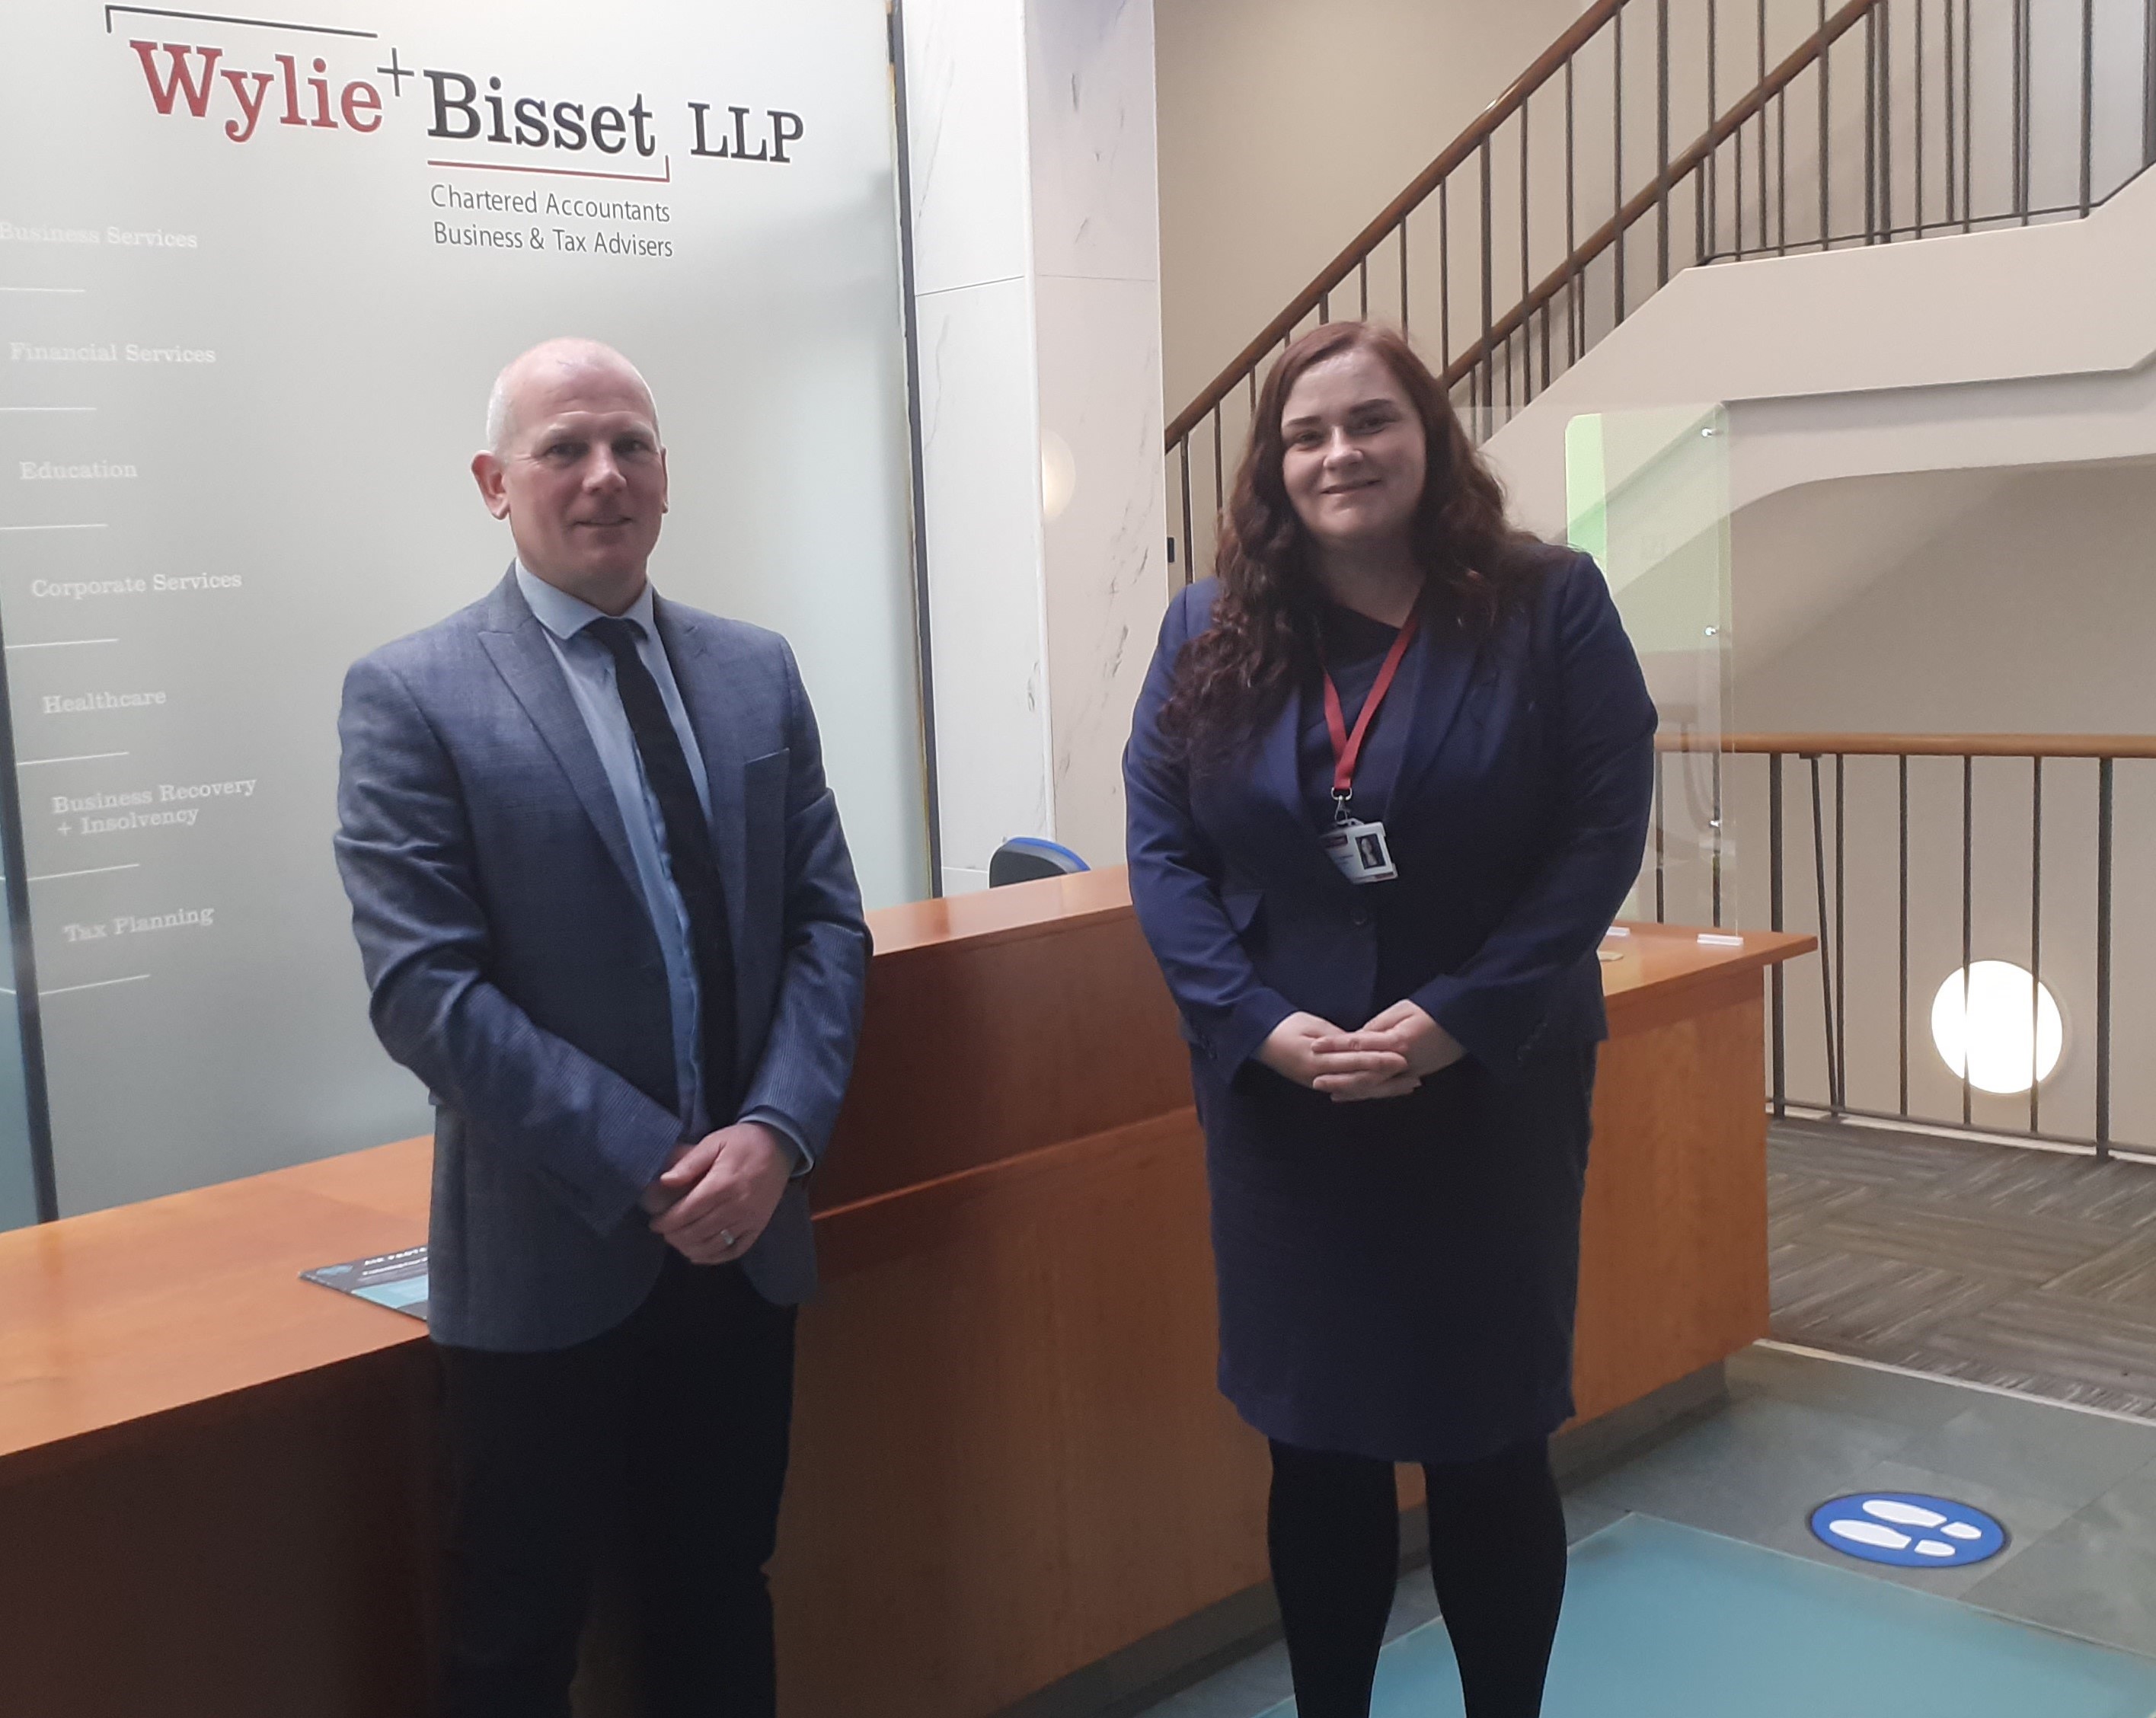 Wylie & Bisset invests in hospitality sector recovery through Professional Partner Network engagement